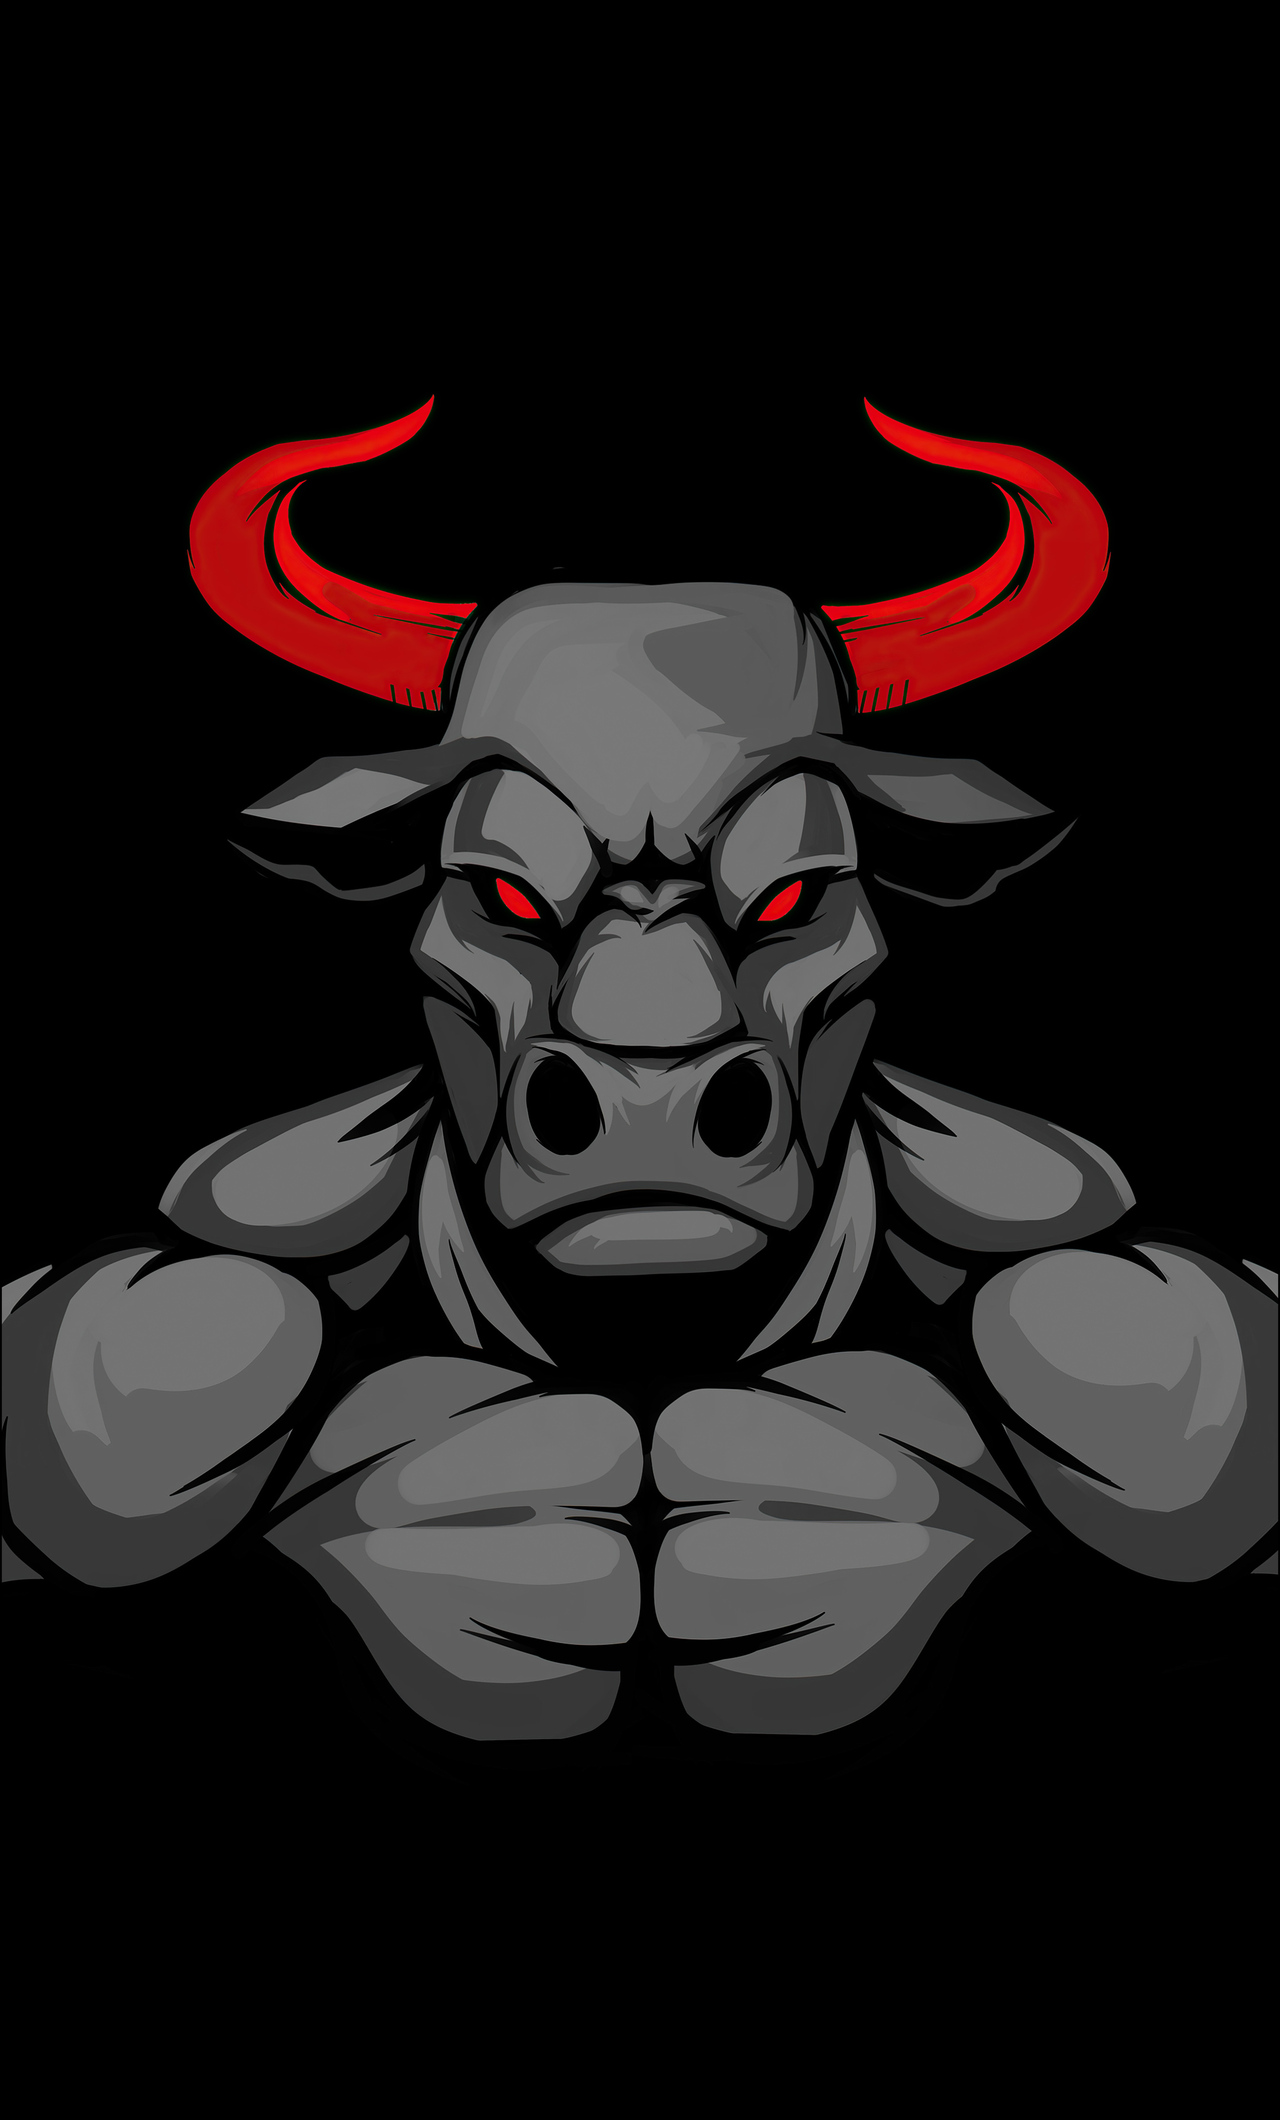 1280x2120 Dangerous Bull 5k iPhone 6+ HD 4k Wallpapers, Images, Backgrounds,  Photos and Pictures